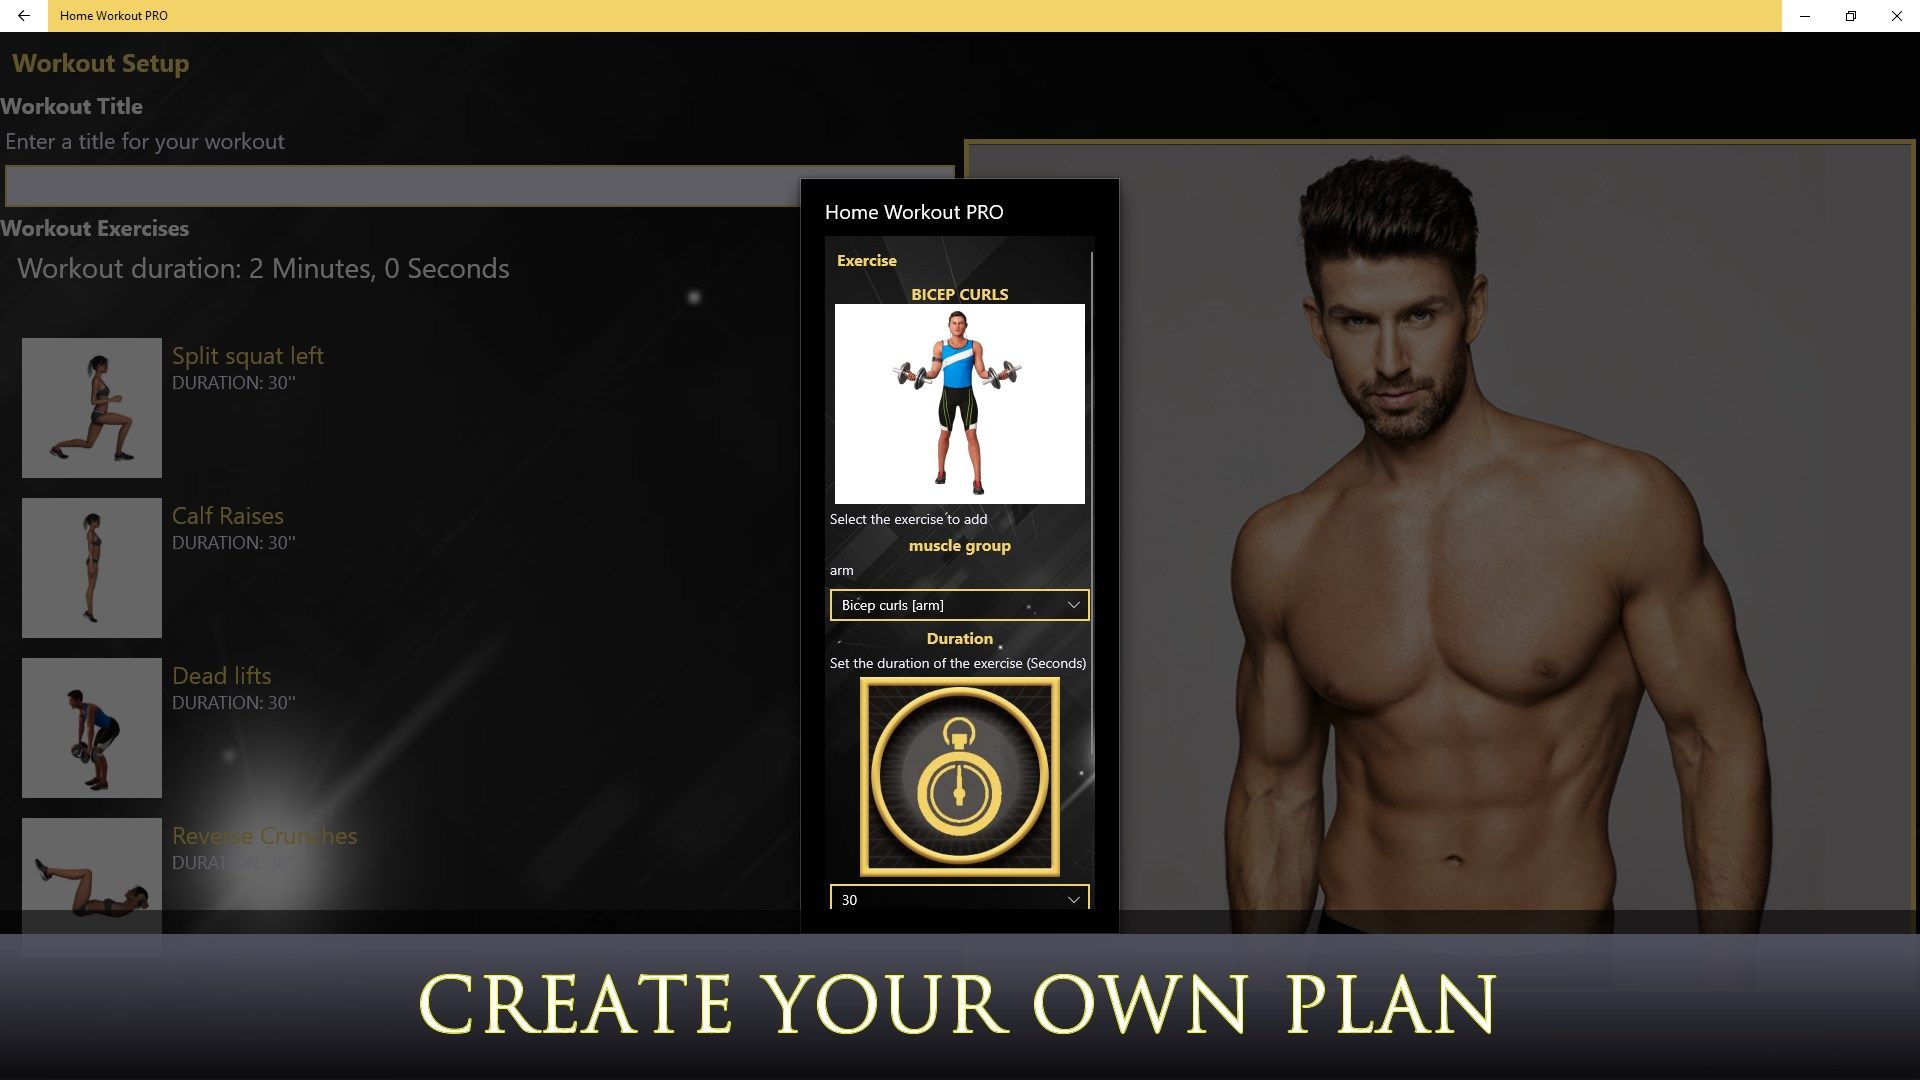 Home Workout PRO: with music, no ads